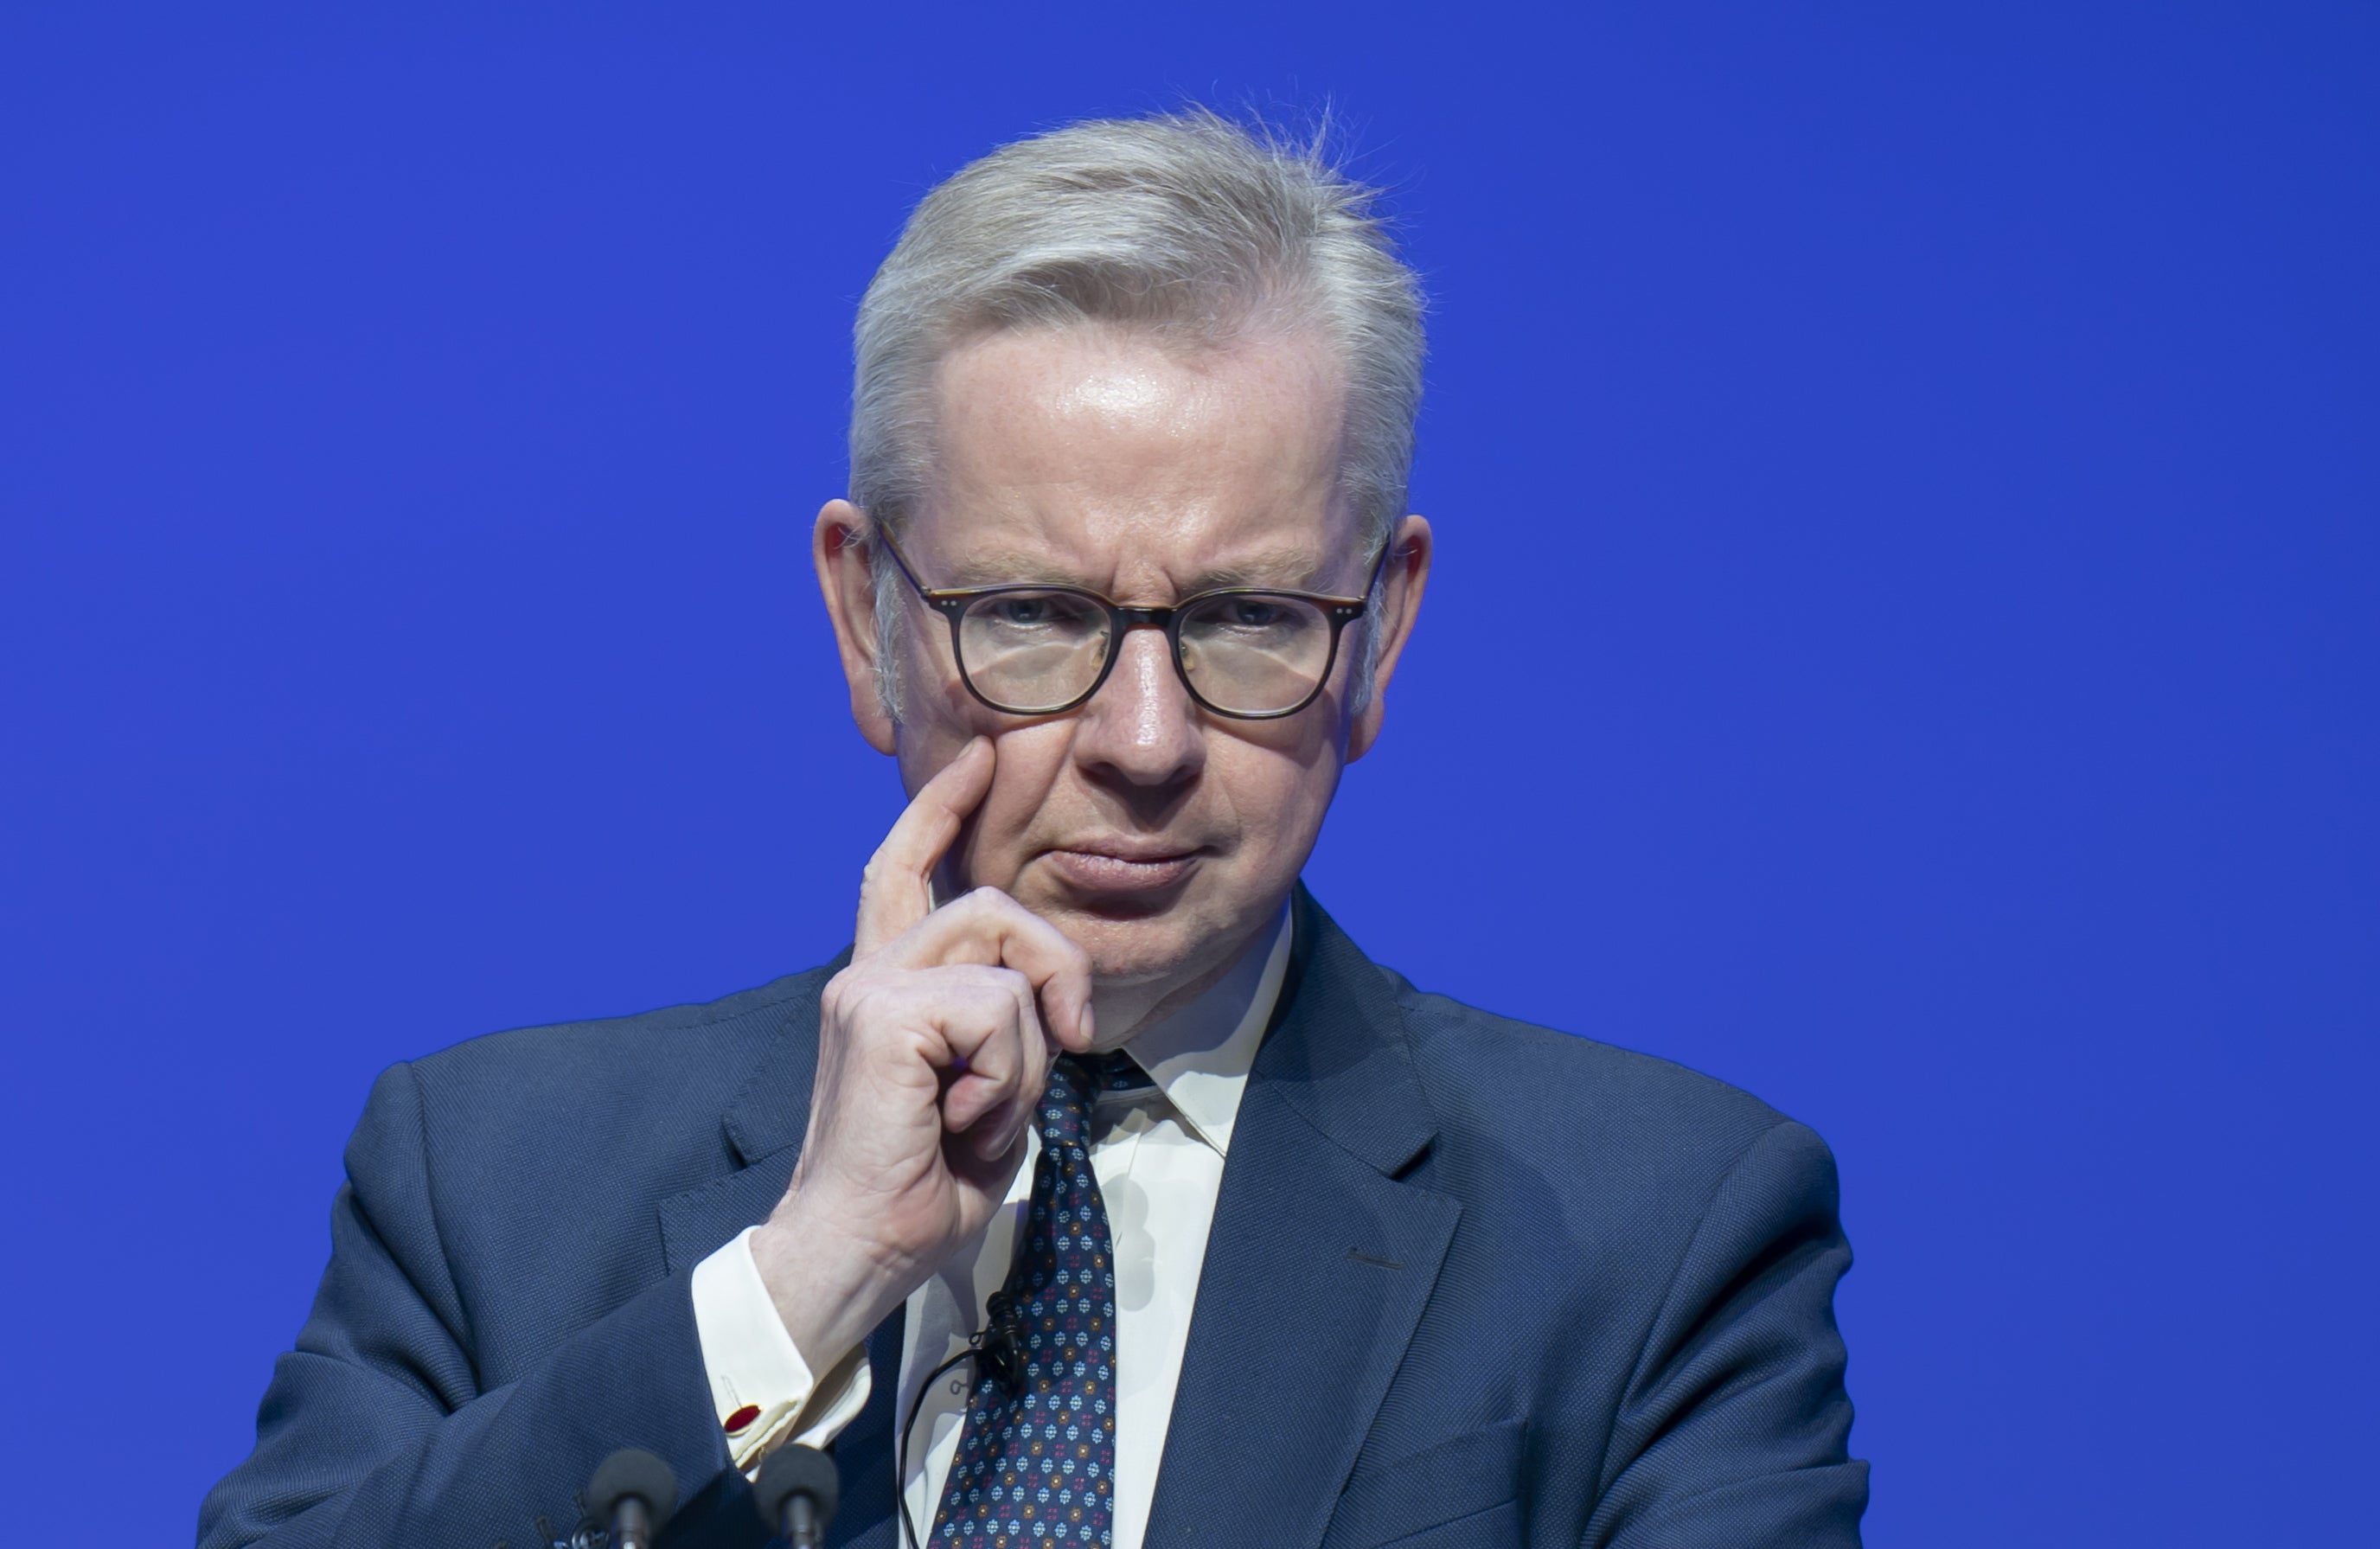 Michael Gove was called a “snake” by a No 10 source after Boris Johnson sacked him as levelling up secretary (